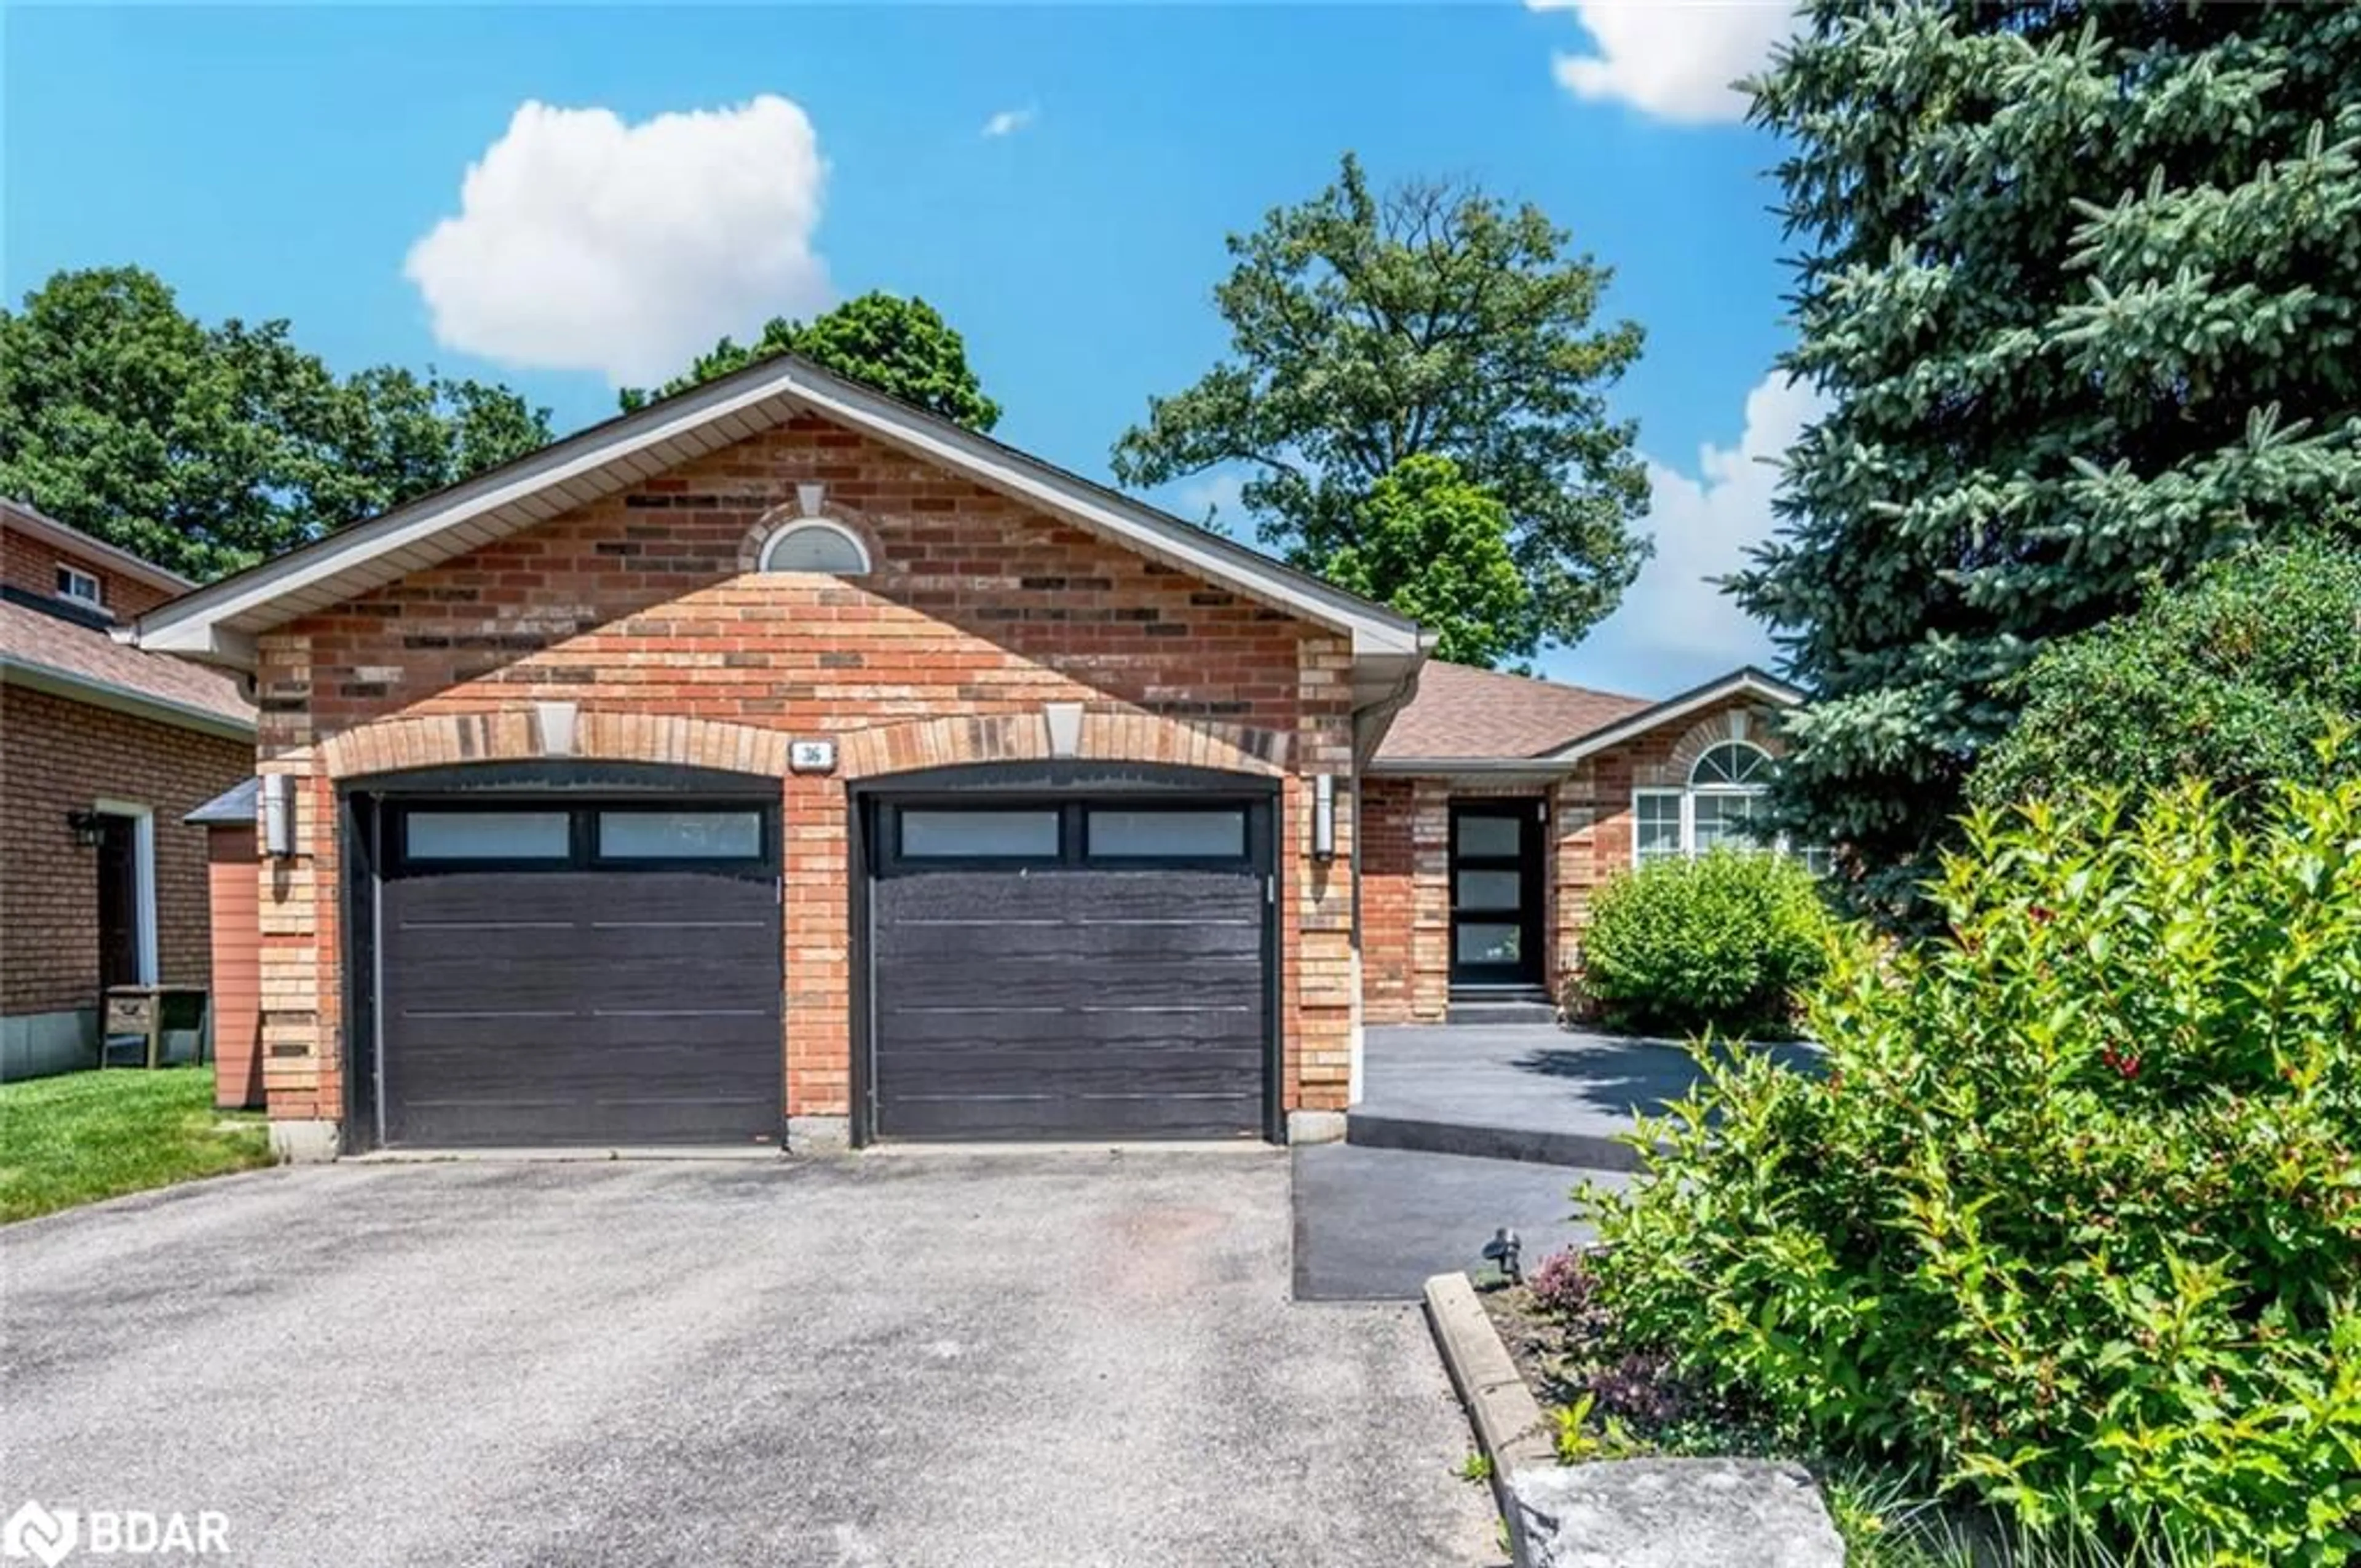 Home with brick exterior material for 36 Glen Oak Crt, Barrie Ontario L4M 6M4